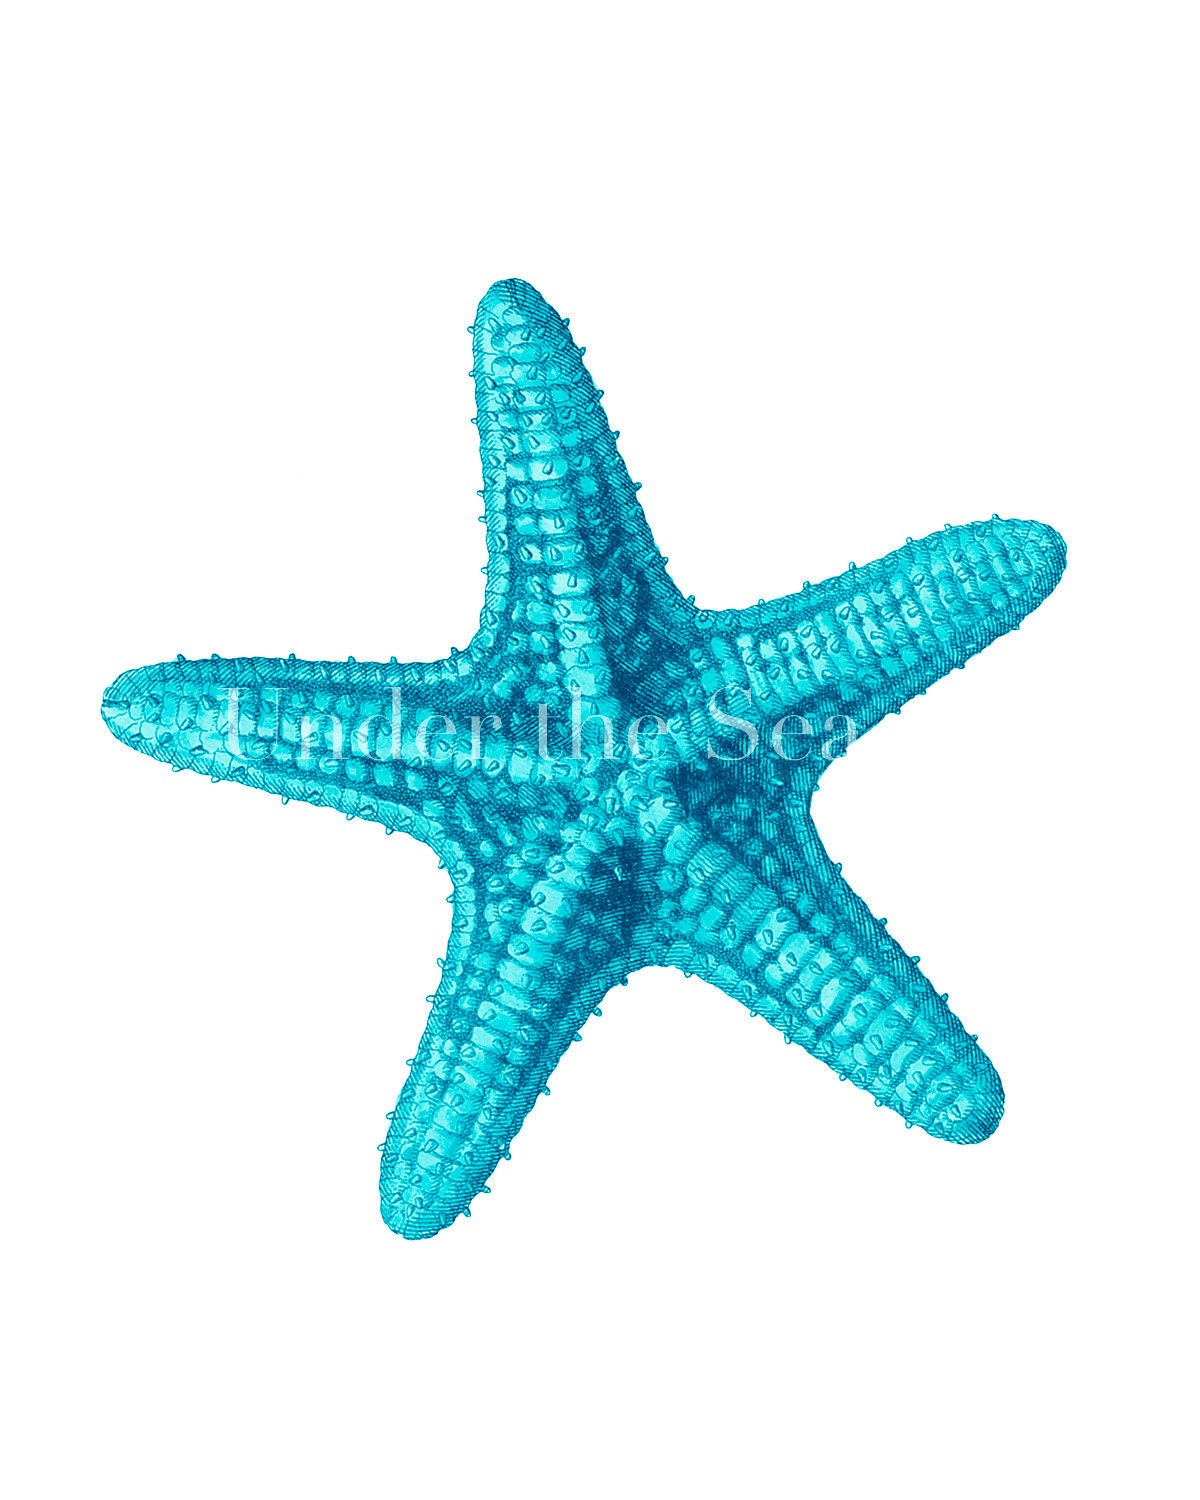 Turquoise Starfish 8x10 Giclee by undertheseaprints on Etsy